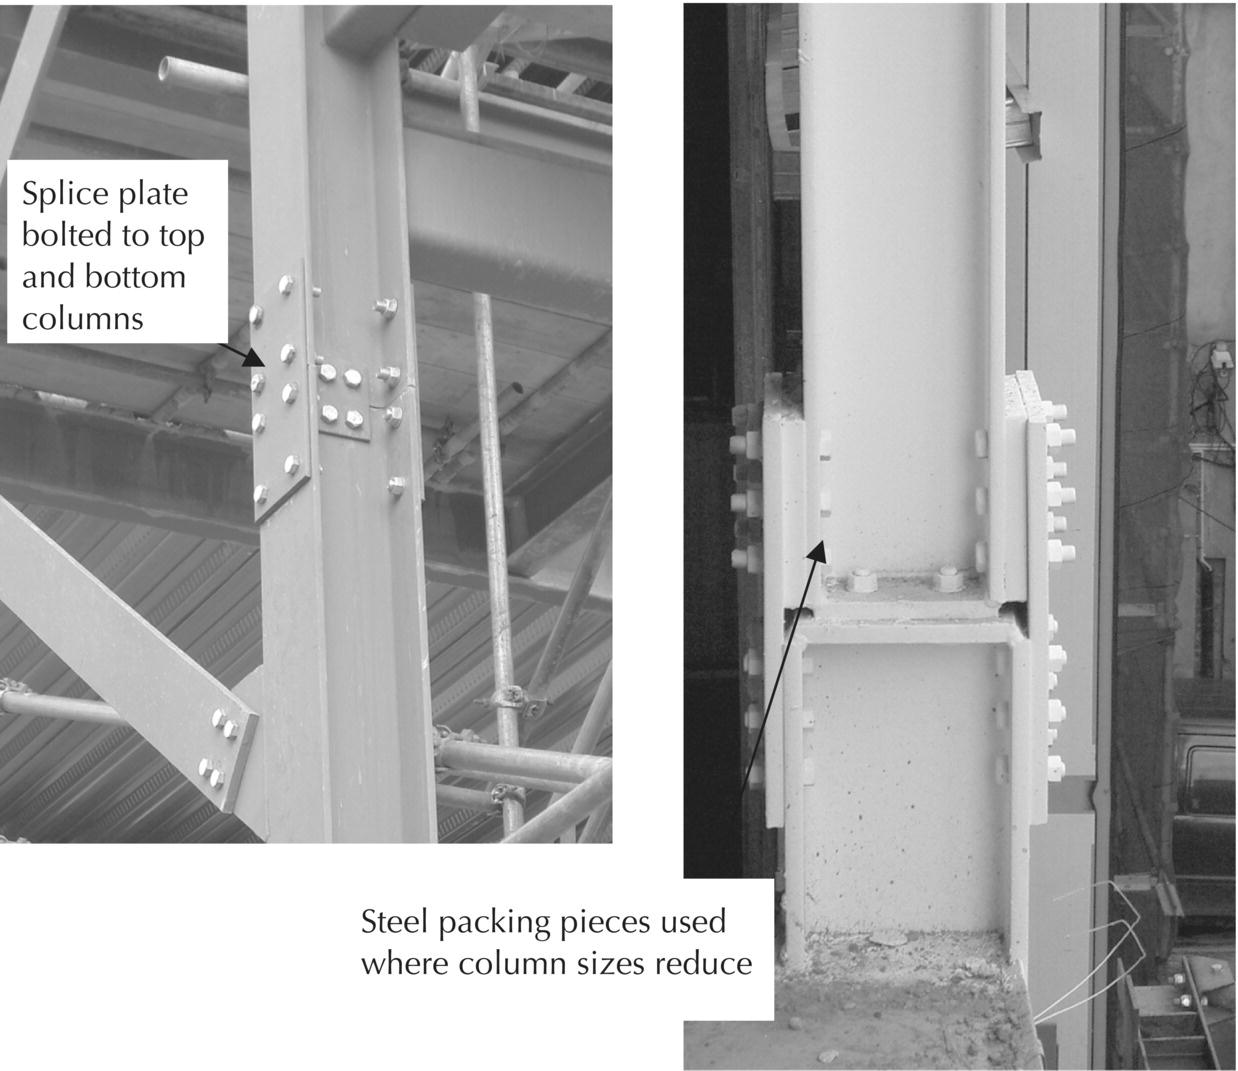 2 Photos displaying spliced column connection with arrows indicating splice plate bolted to top and bottom columns (left) and steel packing pieces used where column sizes reduce (right).